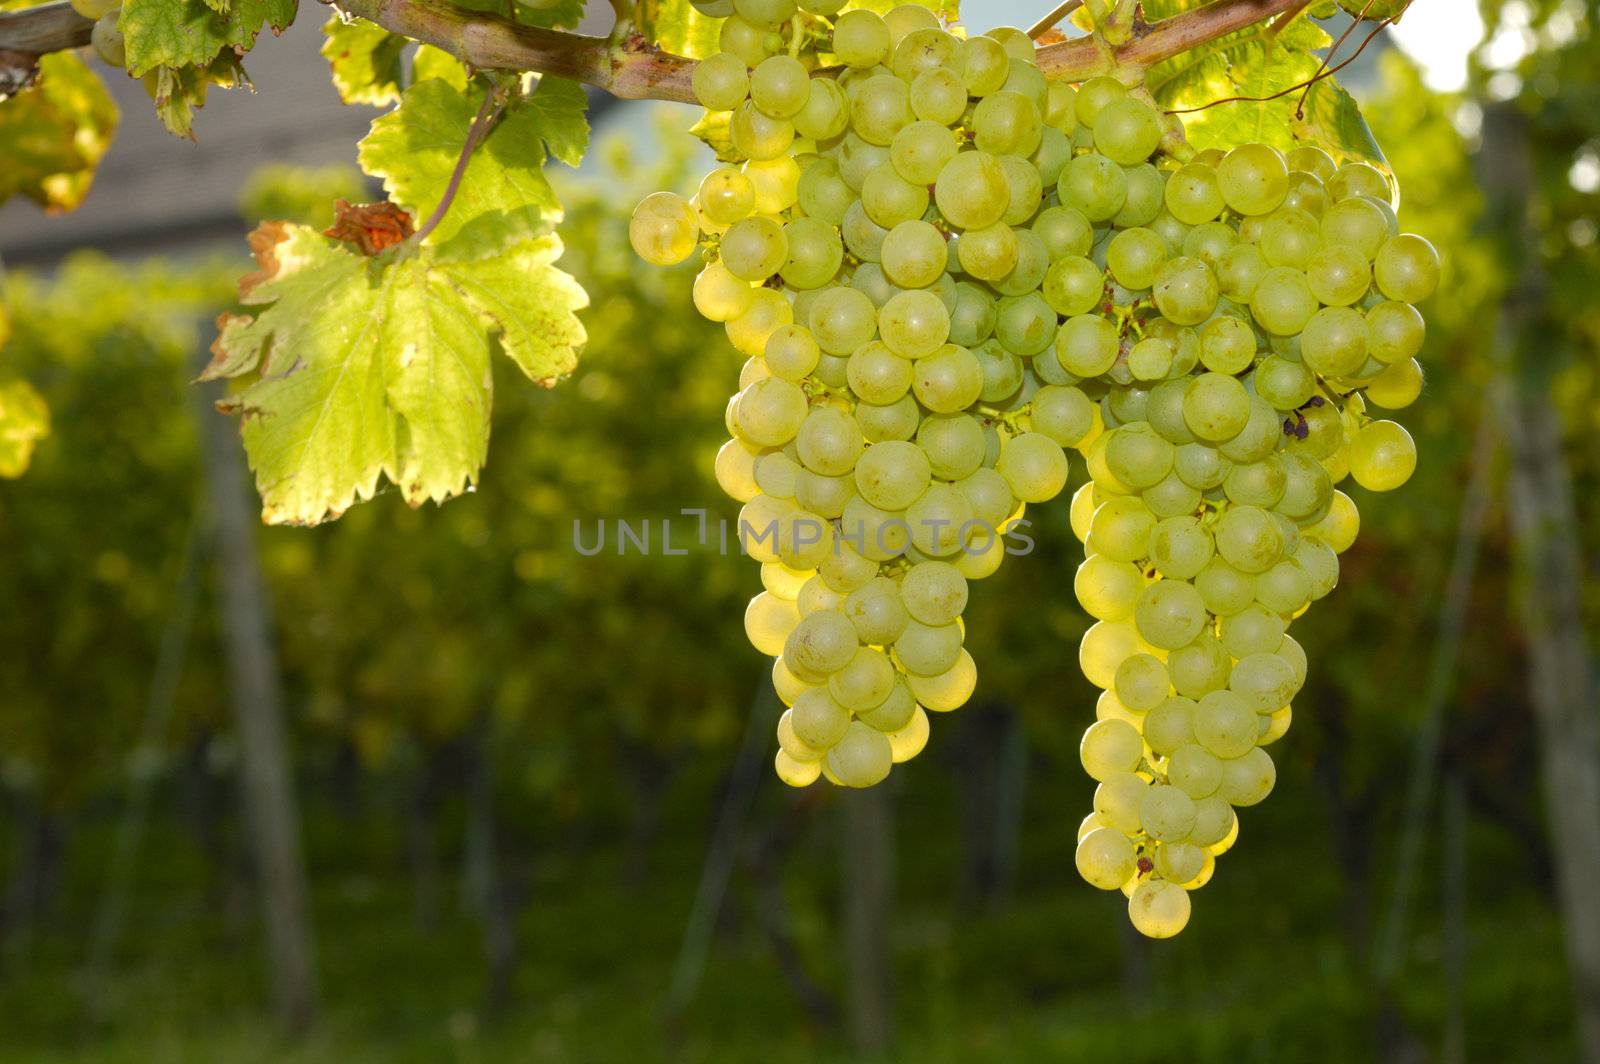 Bunches of white grapes ripening on a vine in Switzerland. Taken contre-jour. More vines and part of the vineyard owner's house can be seen, out of focus, in the background.